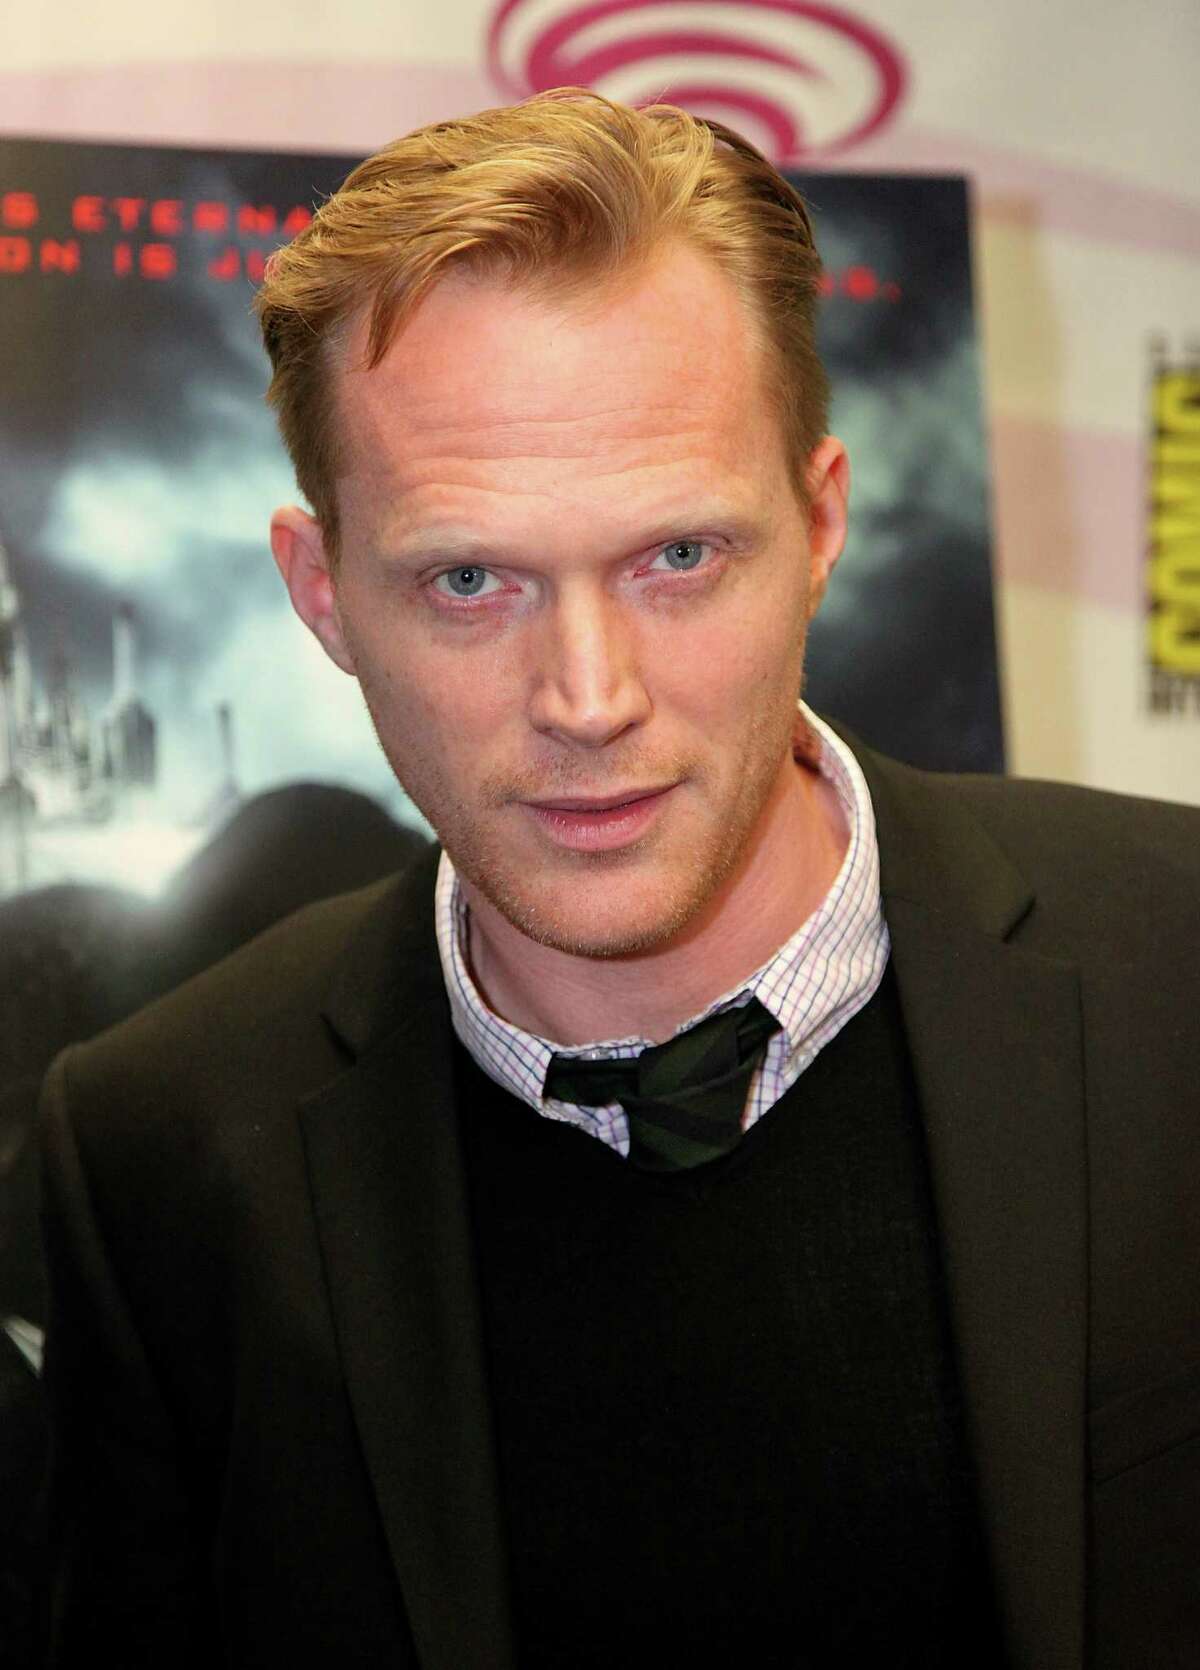 SAN FRANCISCO, CA - APRIL 02: Paul Bettany poses during 2011 WonderCon at Moscone Convention Center on April 2, 2011 in San Francisco, California. (Photo by Max Morse/Getty Images)